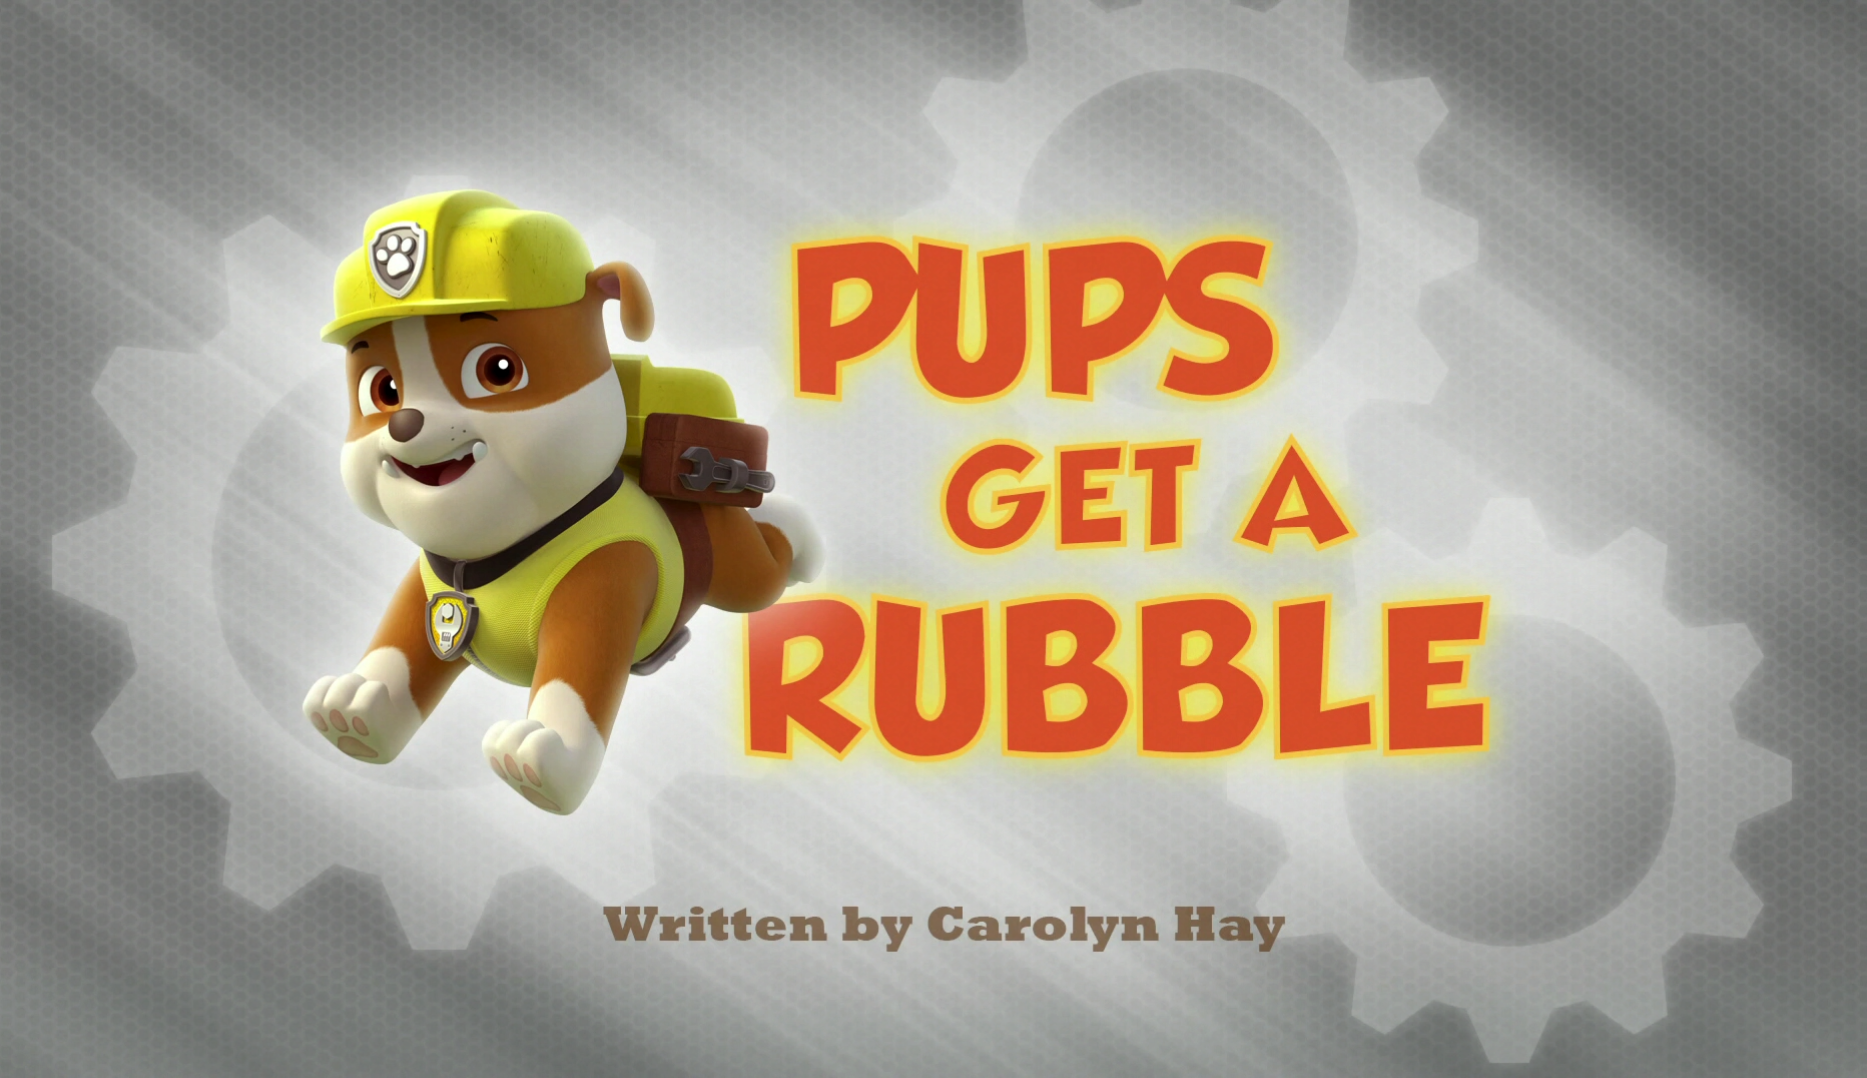 https://static.wikia.nocookie.net/paw-patrol/images/9/91/Pups_Get_a_Rubble.png/revision/latest?cb=20131115182012